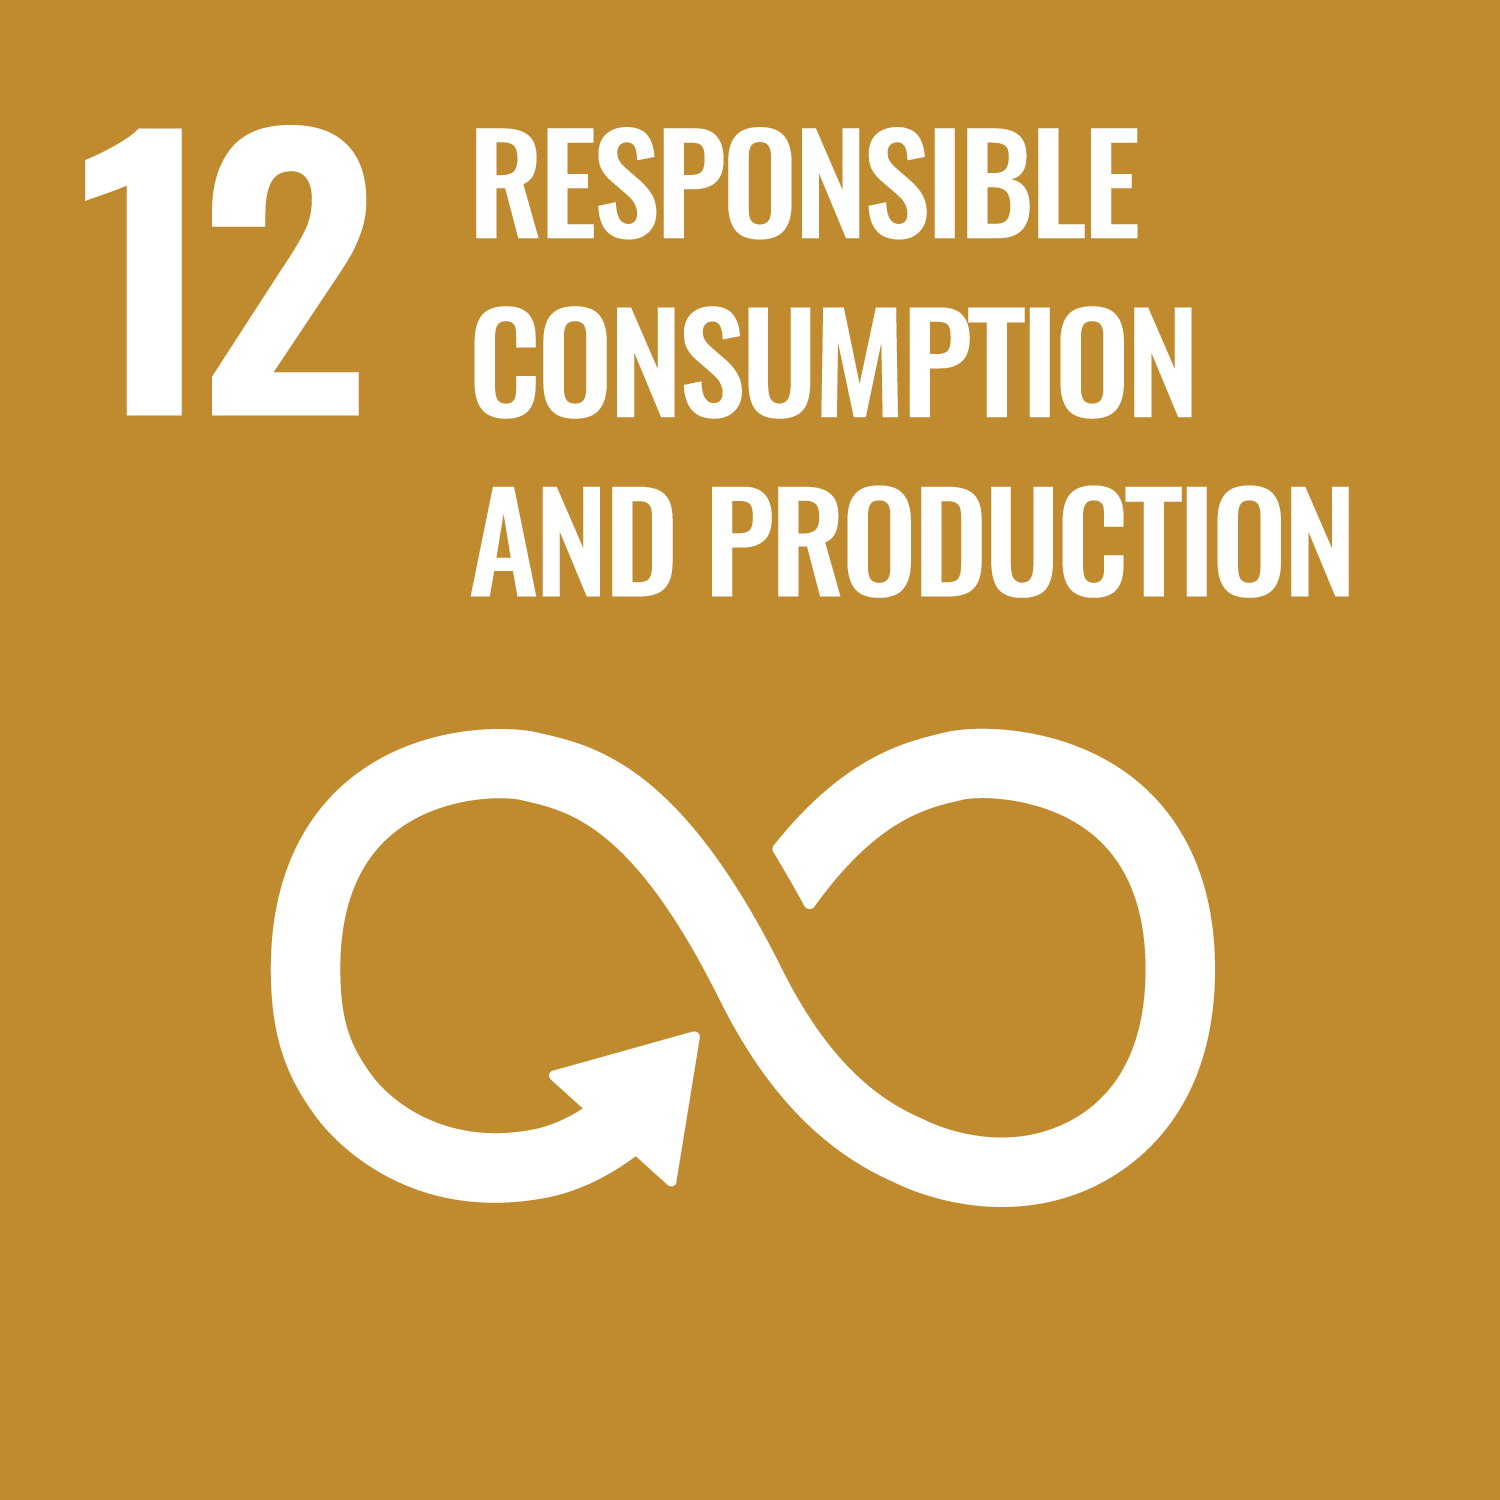 12. Responsible consumption and production The resources of our planet are not infinite. Consumption and production is a driving force in economy, but it can be destructive without a responsible and sustainable approach. How we target this SDG? Our company is moving towards sustainable patterns of consumption and production. We have internal carbon metrics and life cycle assessments to take smart and sustainable decisions. We are making efforts to reduce our total waste in our facilities with the goal of becoming a zero waste facility soon.